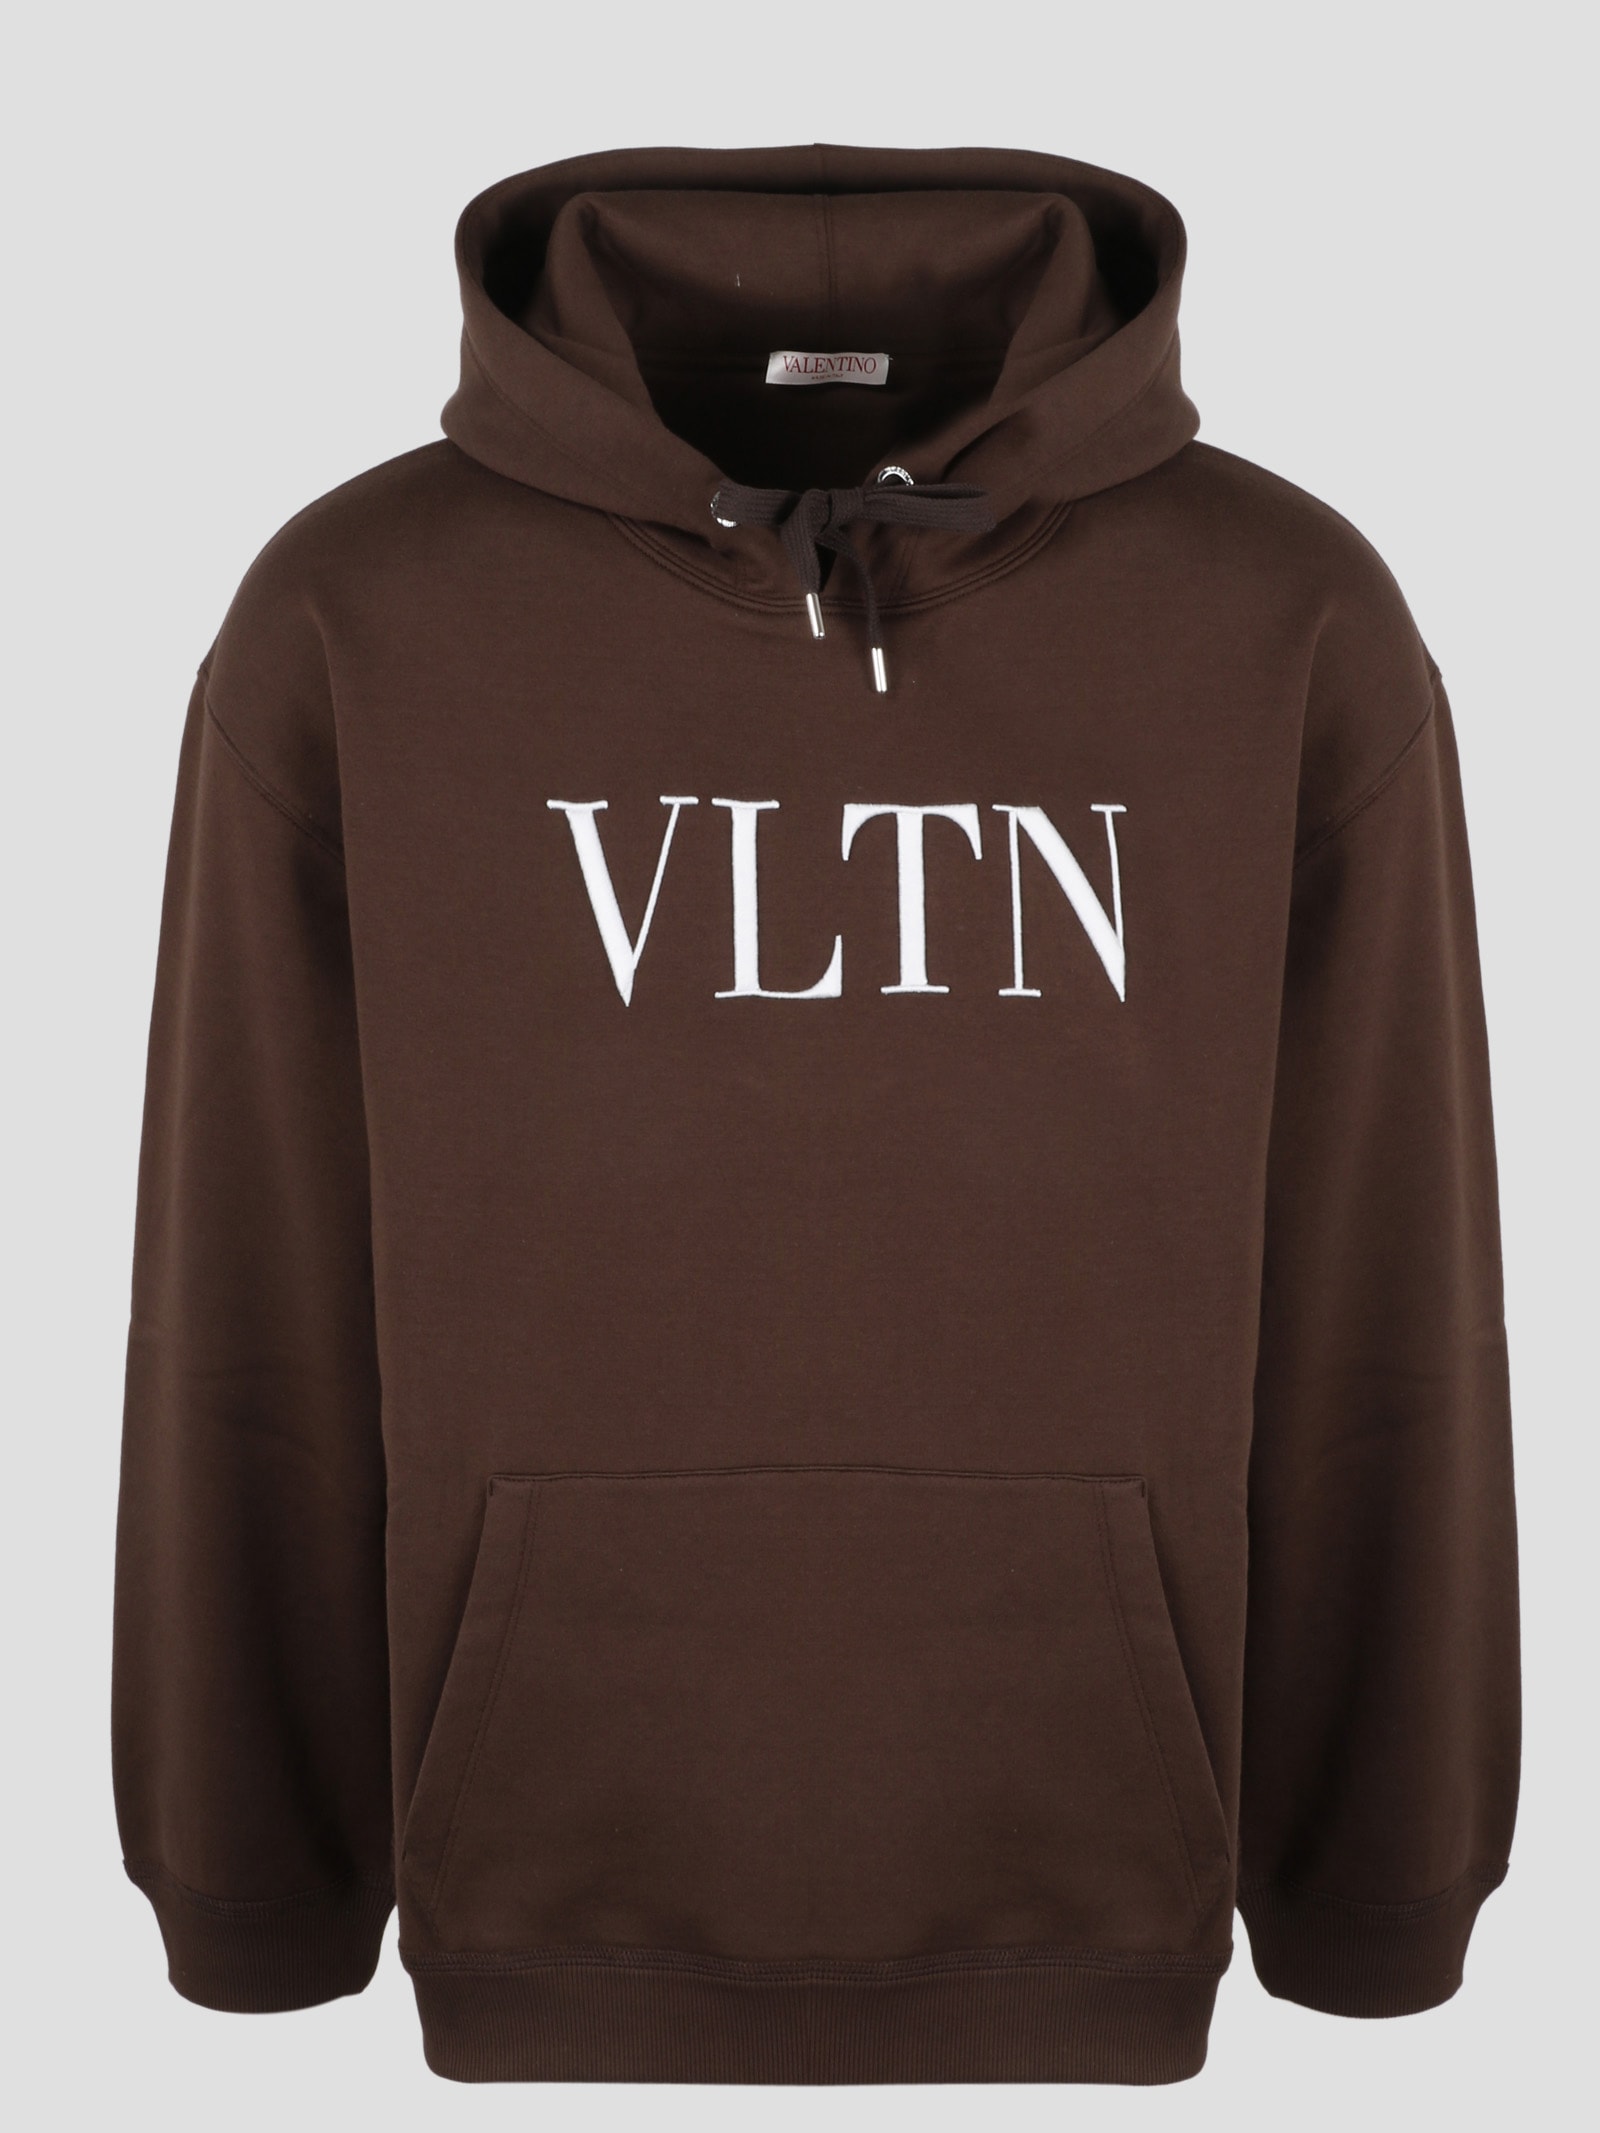 Valentino Vltn Embroidery Hooded